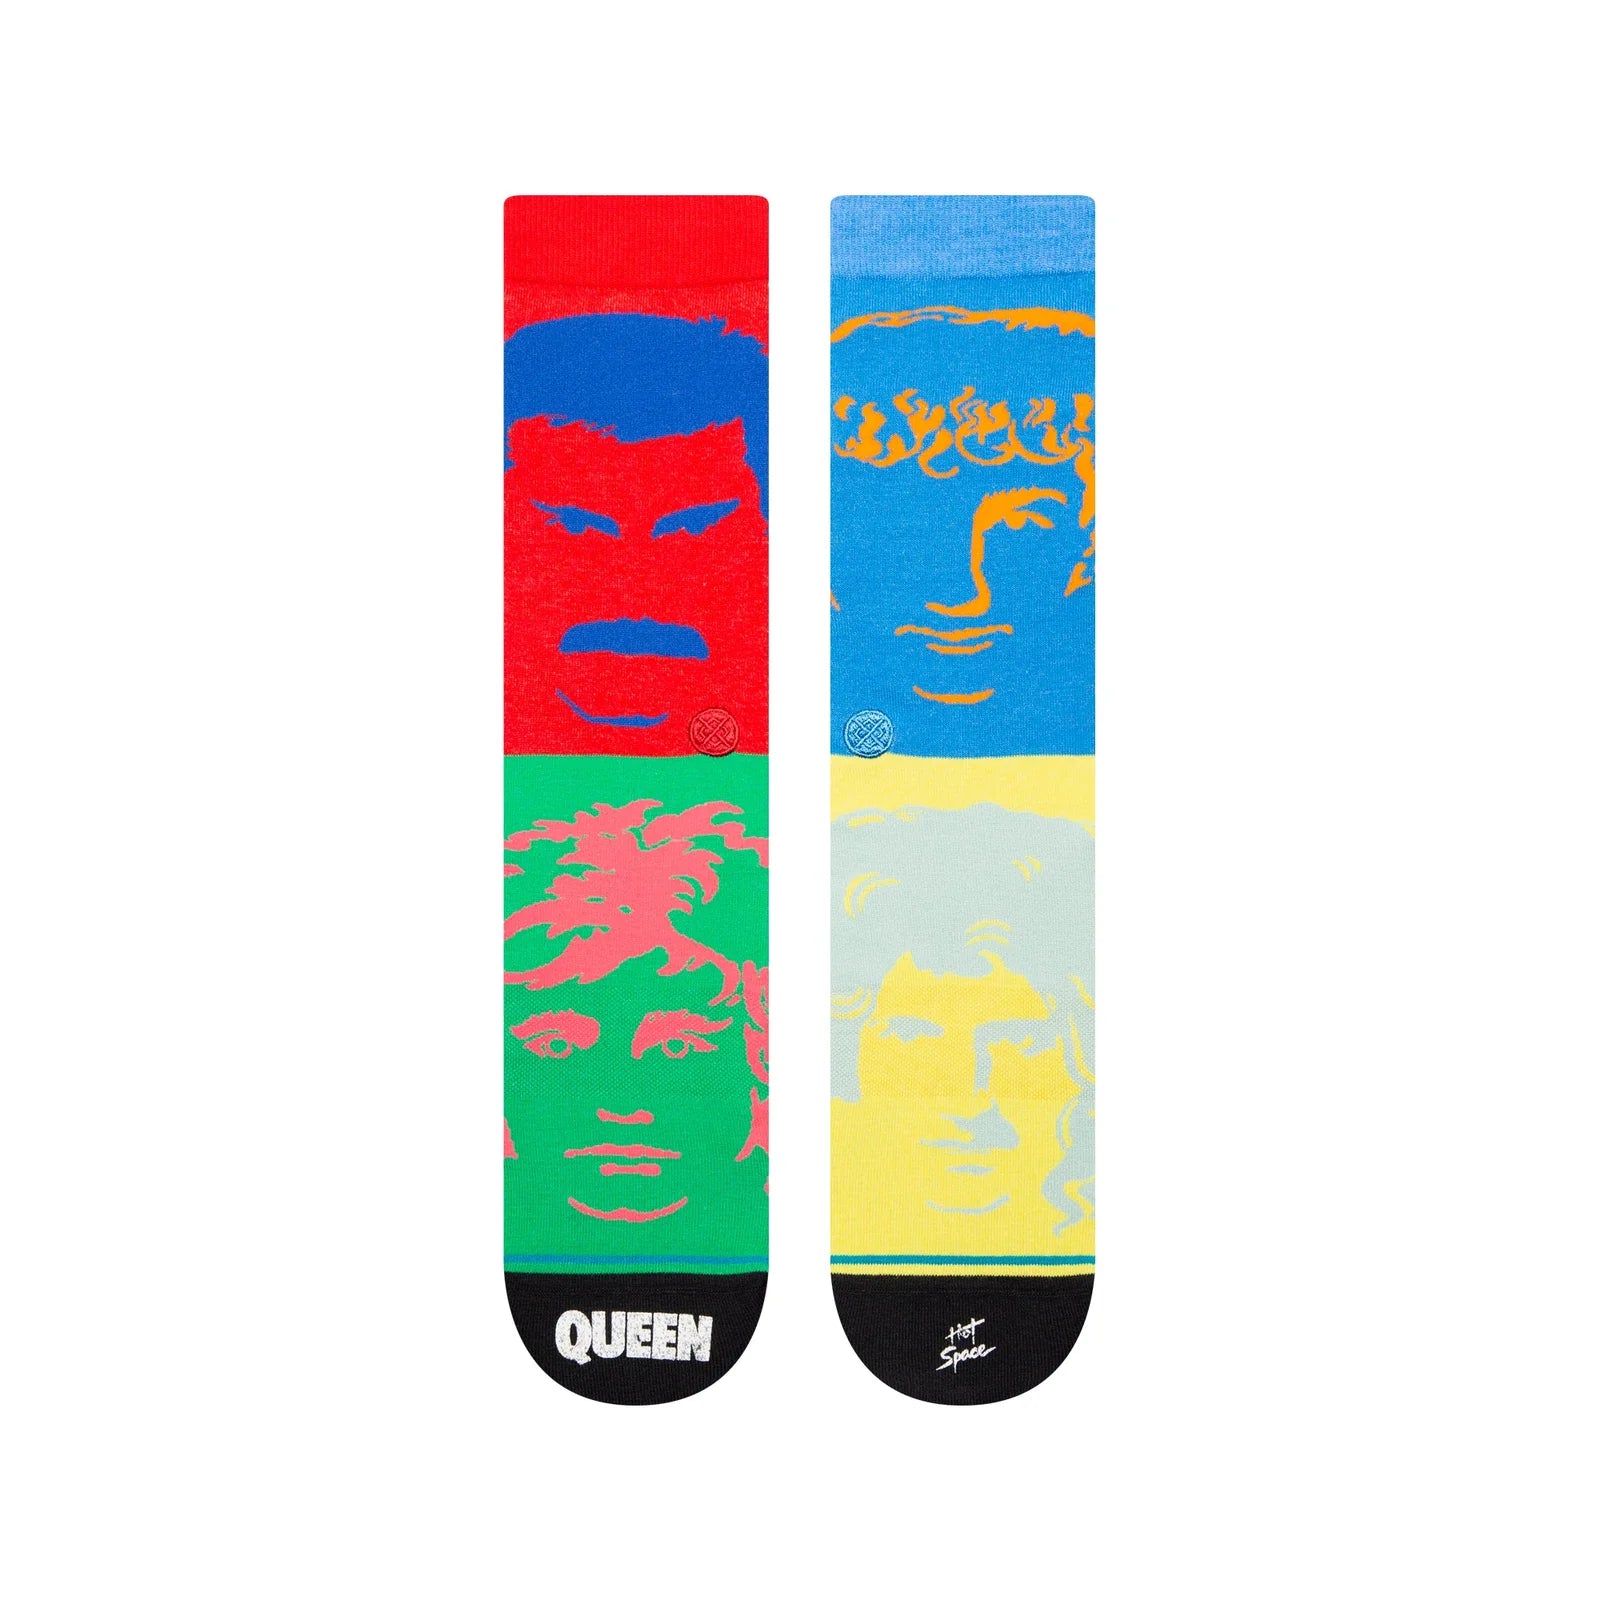 Stance Hot Space Socks